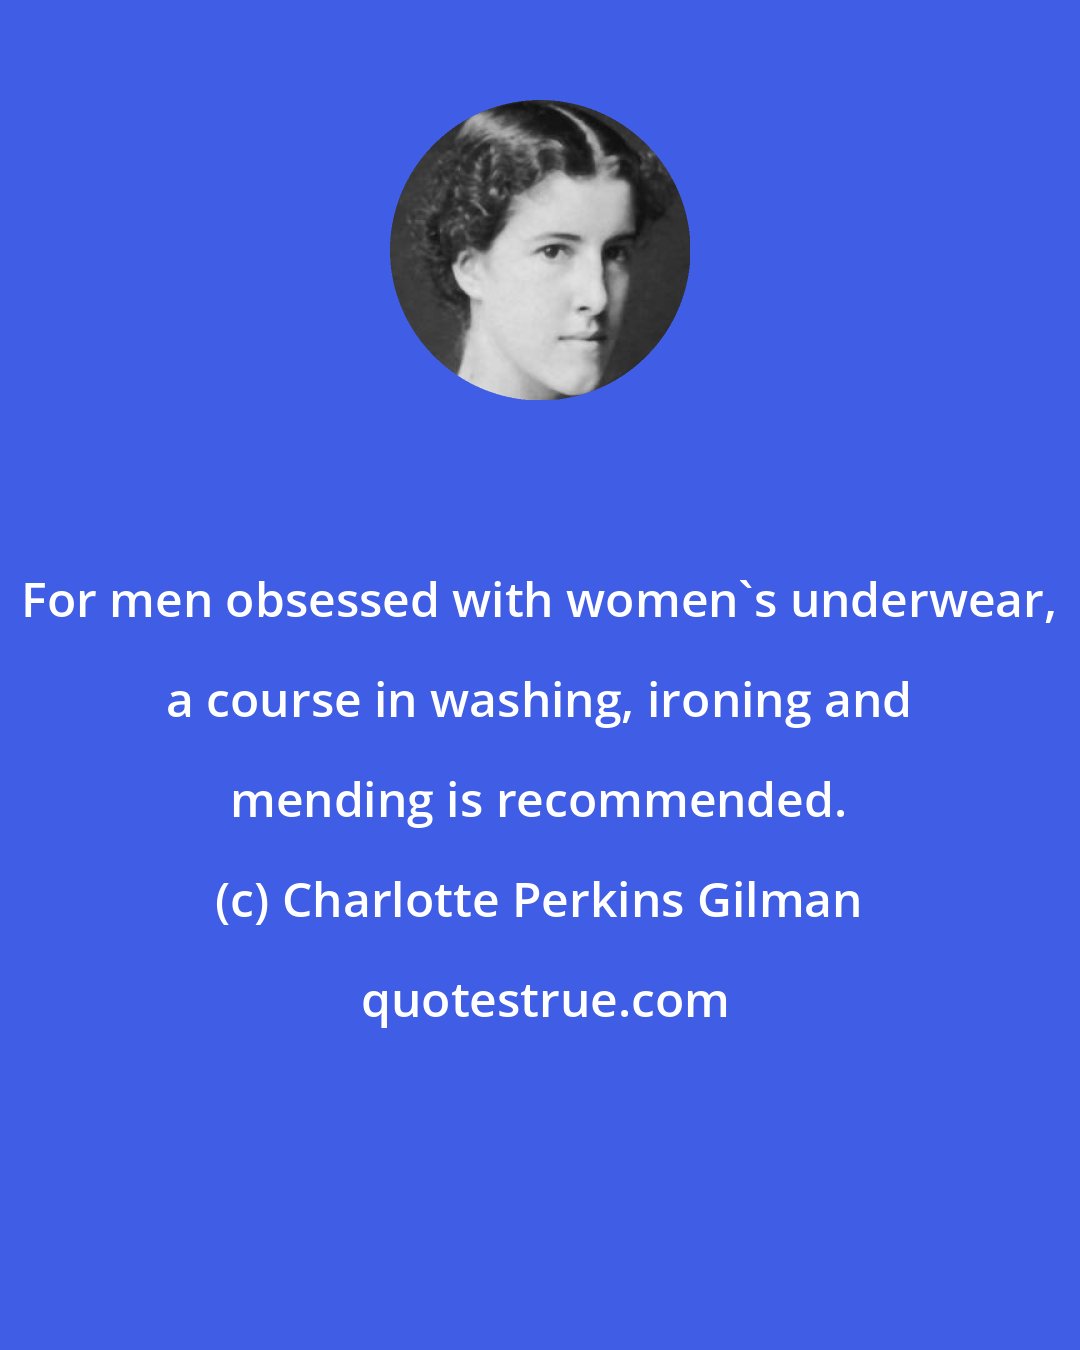 Charlotte Perkins Gilman: For men obsessed with women's underwear, a course in washing, ironing and mending is recommended.